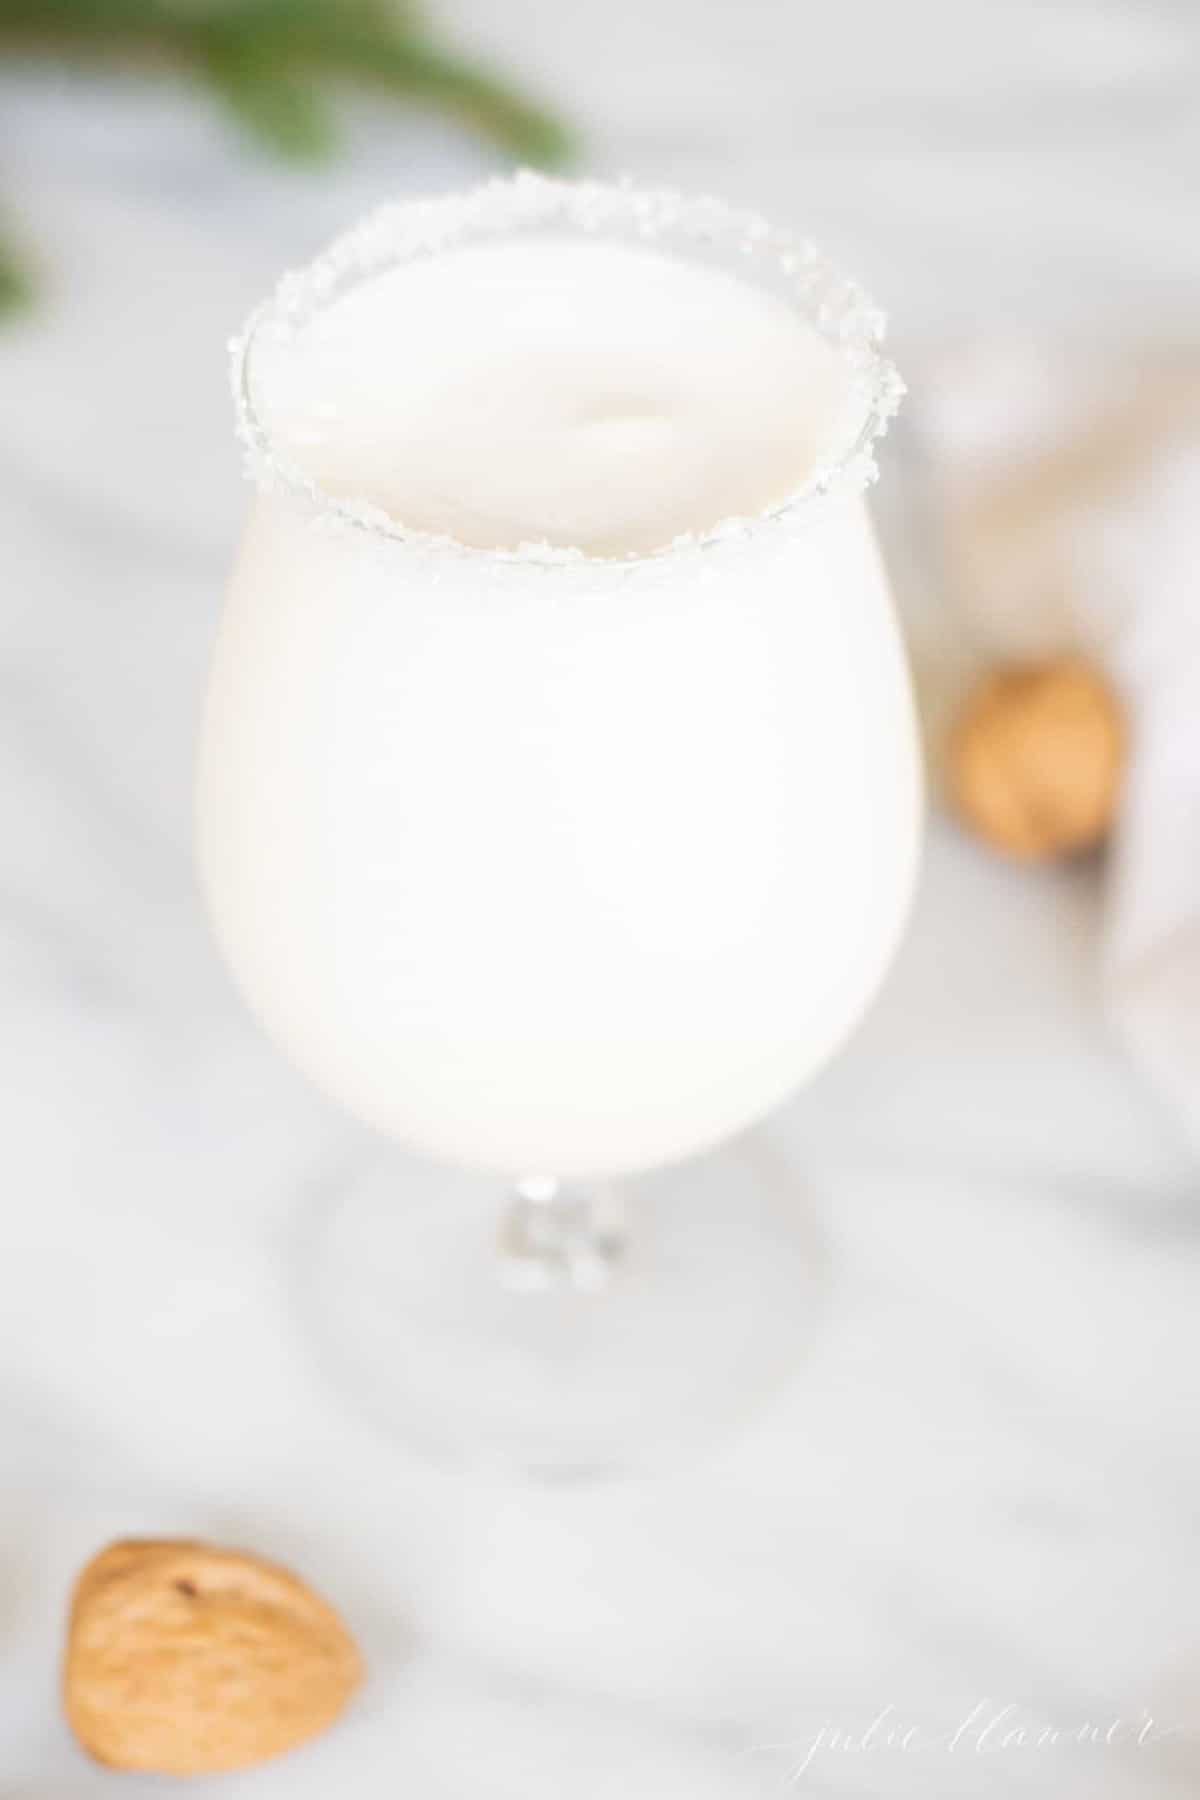 Marble surface with a clear glass filled with a snowball cocktail, rimmed in sugar, with chestnuts tossed around.